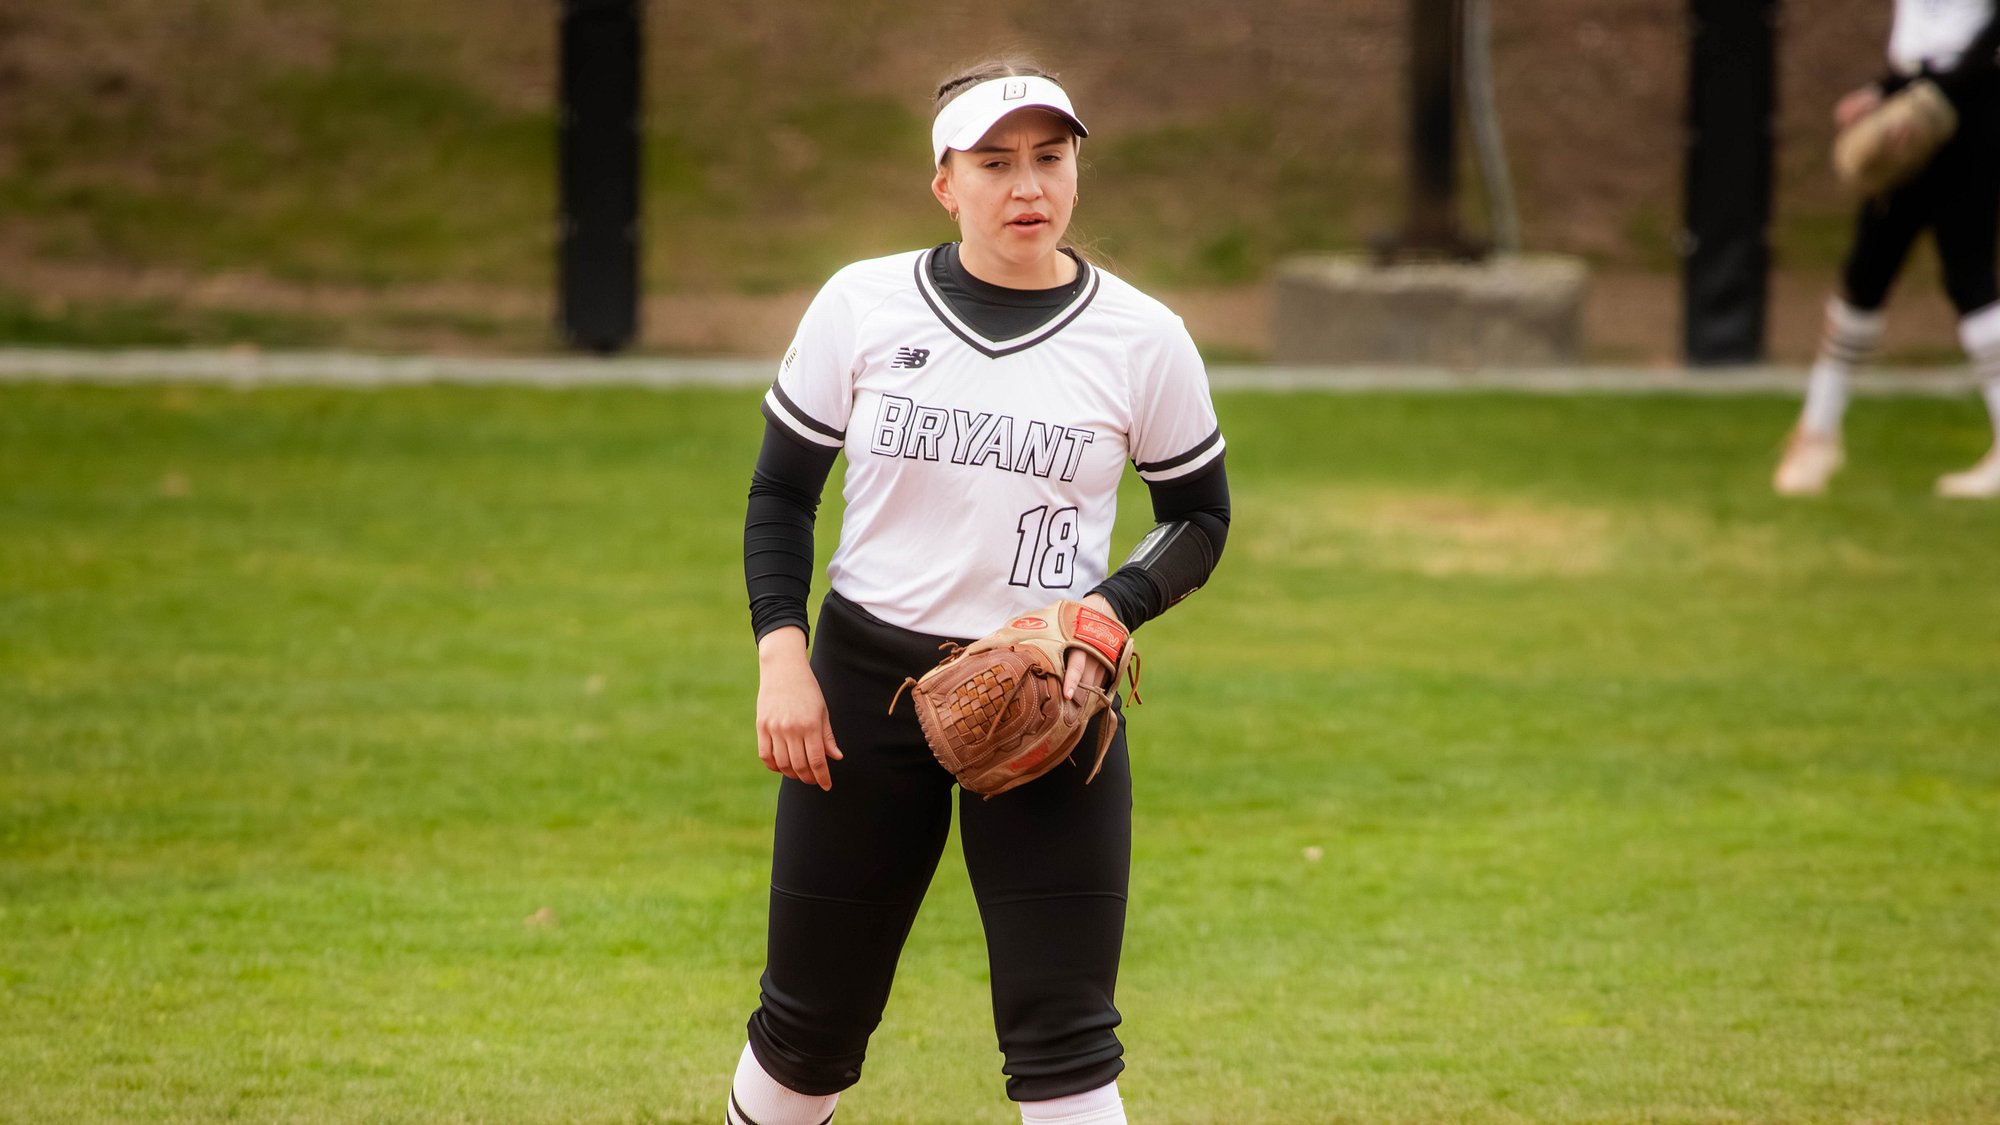 Bryant squares off against Holy Cross for Tuesday DH at Conaty Park